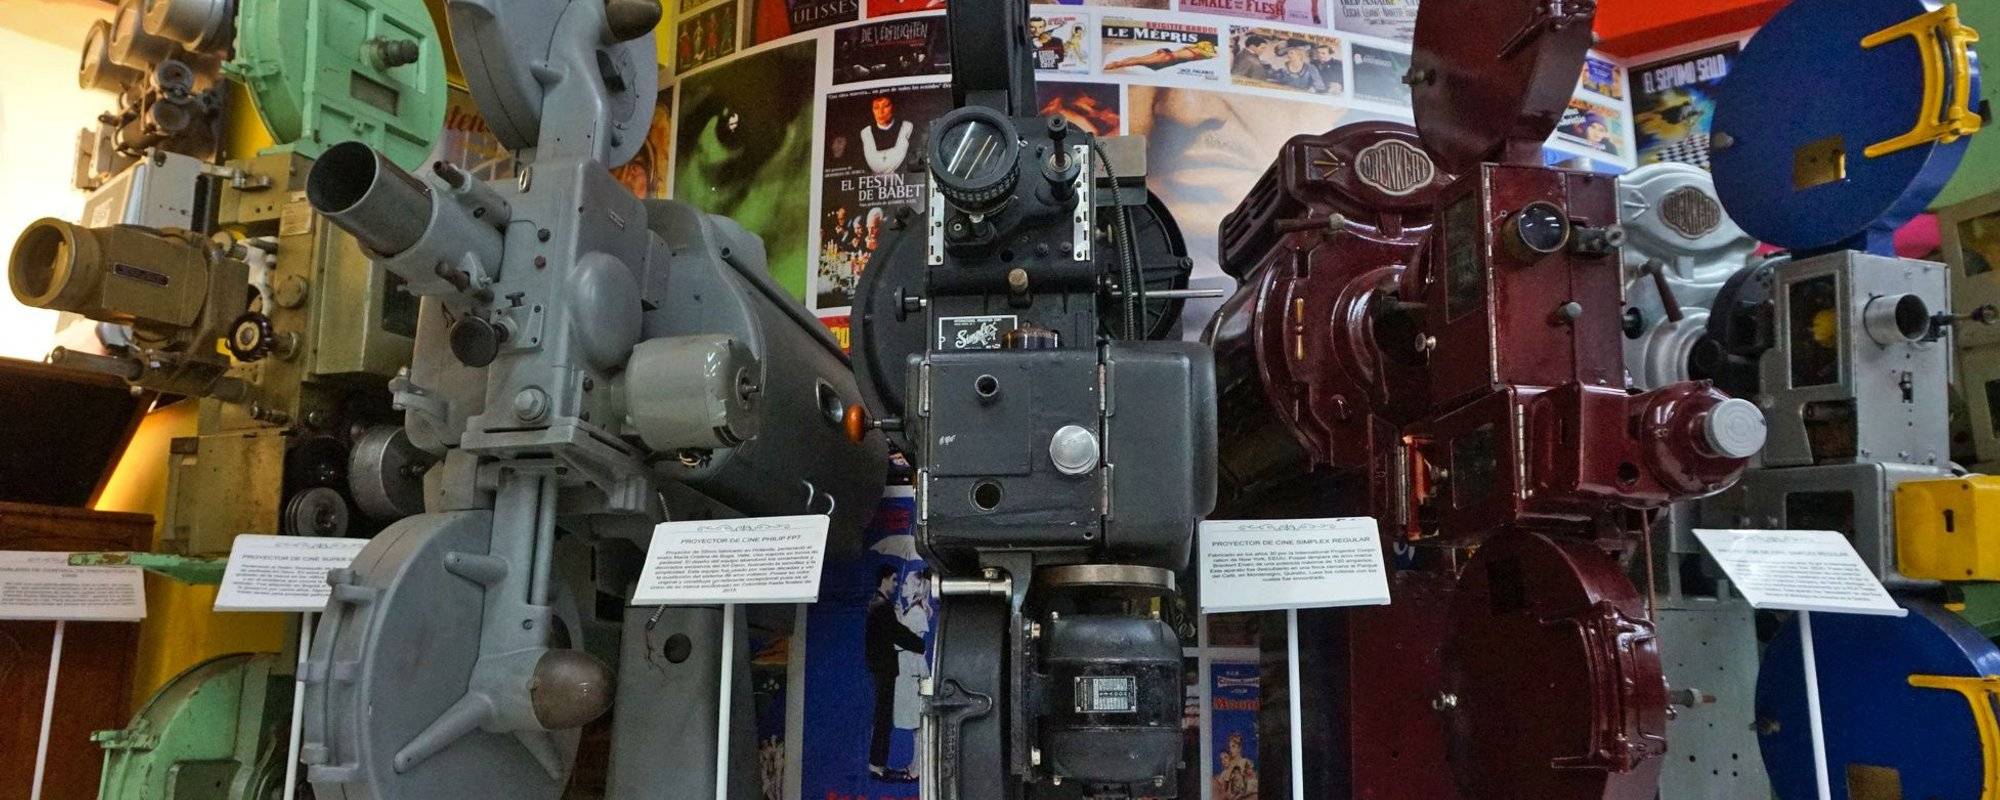 Caliwood - a museum of cinematography in Cali, Colombia